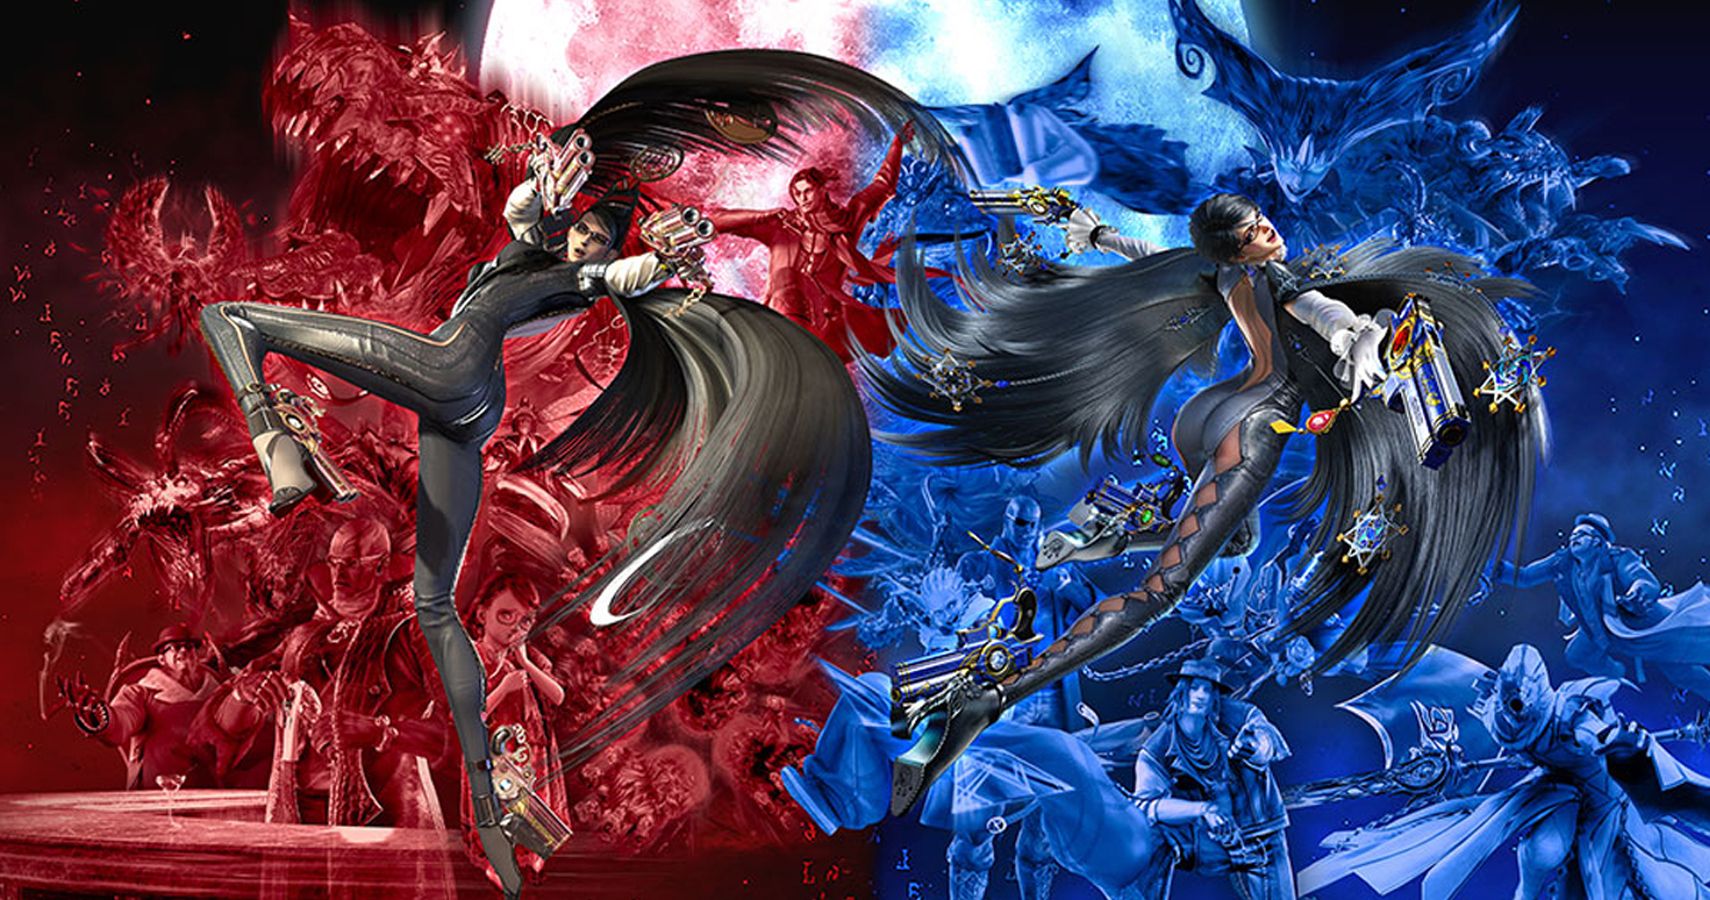 PlatinumGames Would Love To SelfPublish The Bayonetta Series If It Could